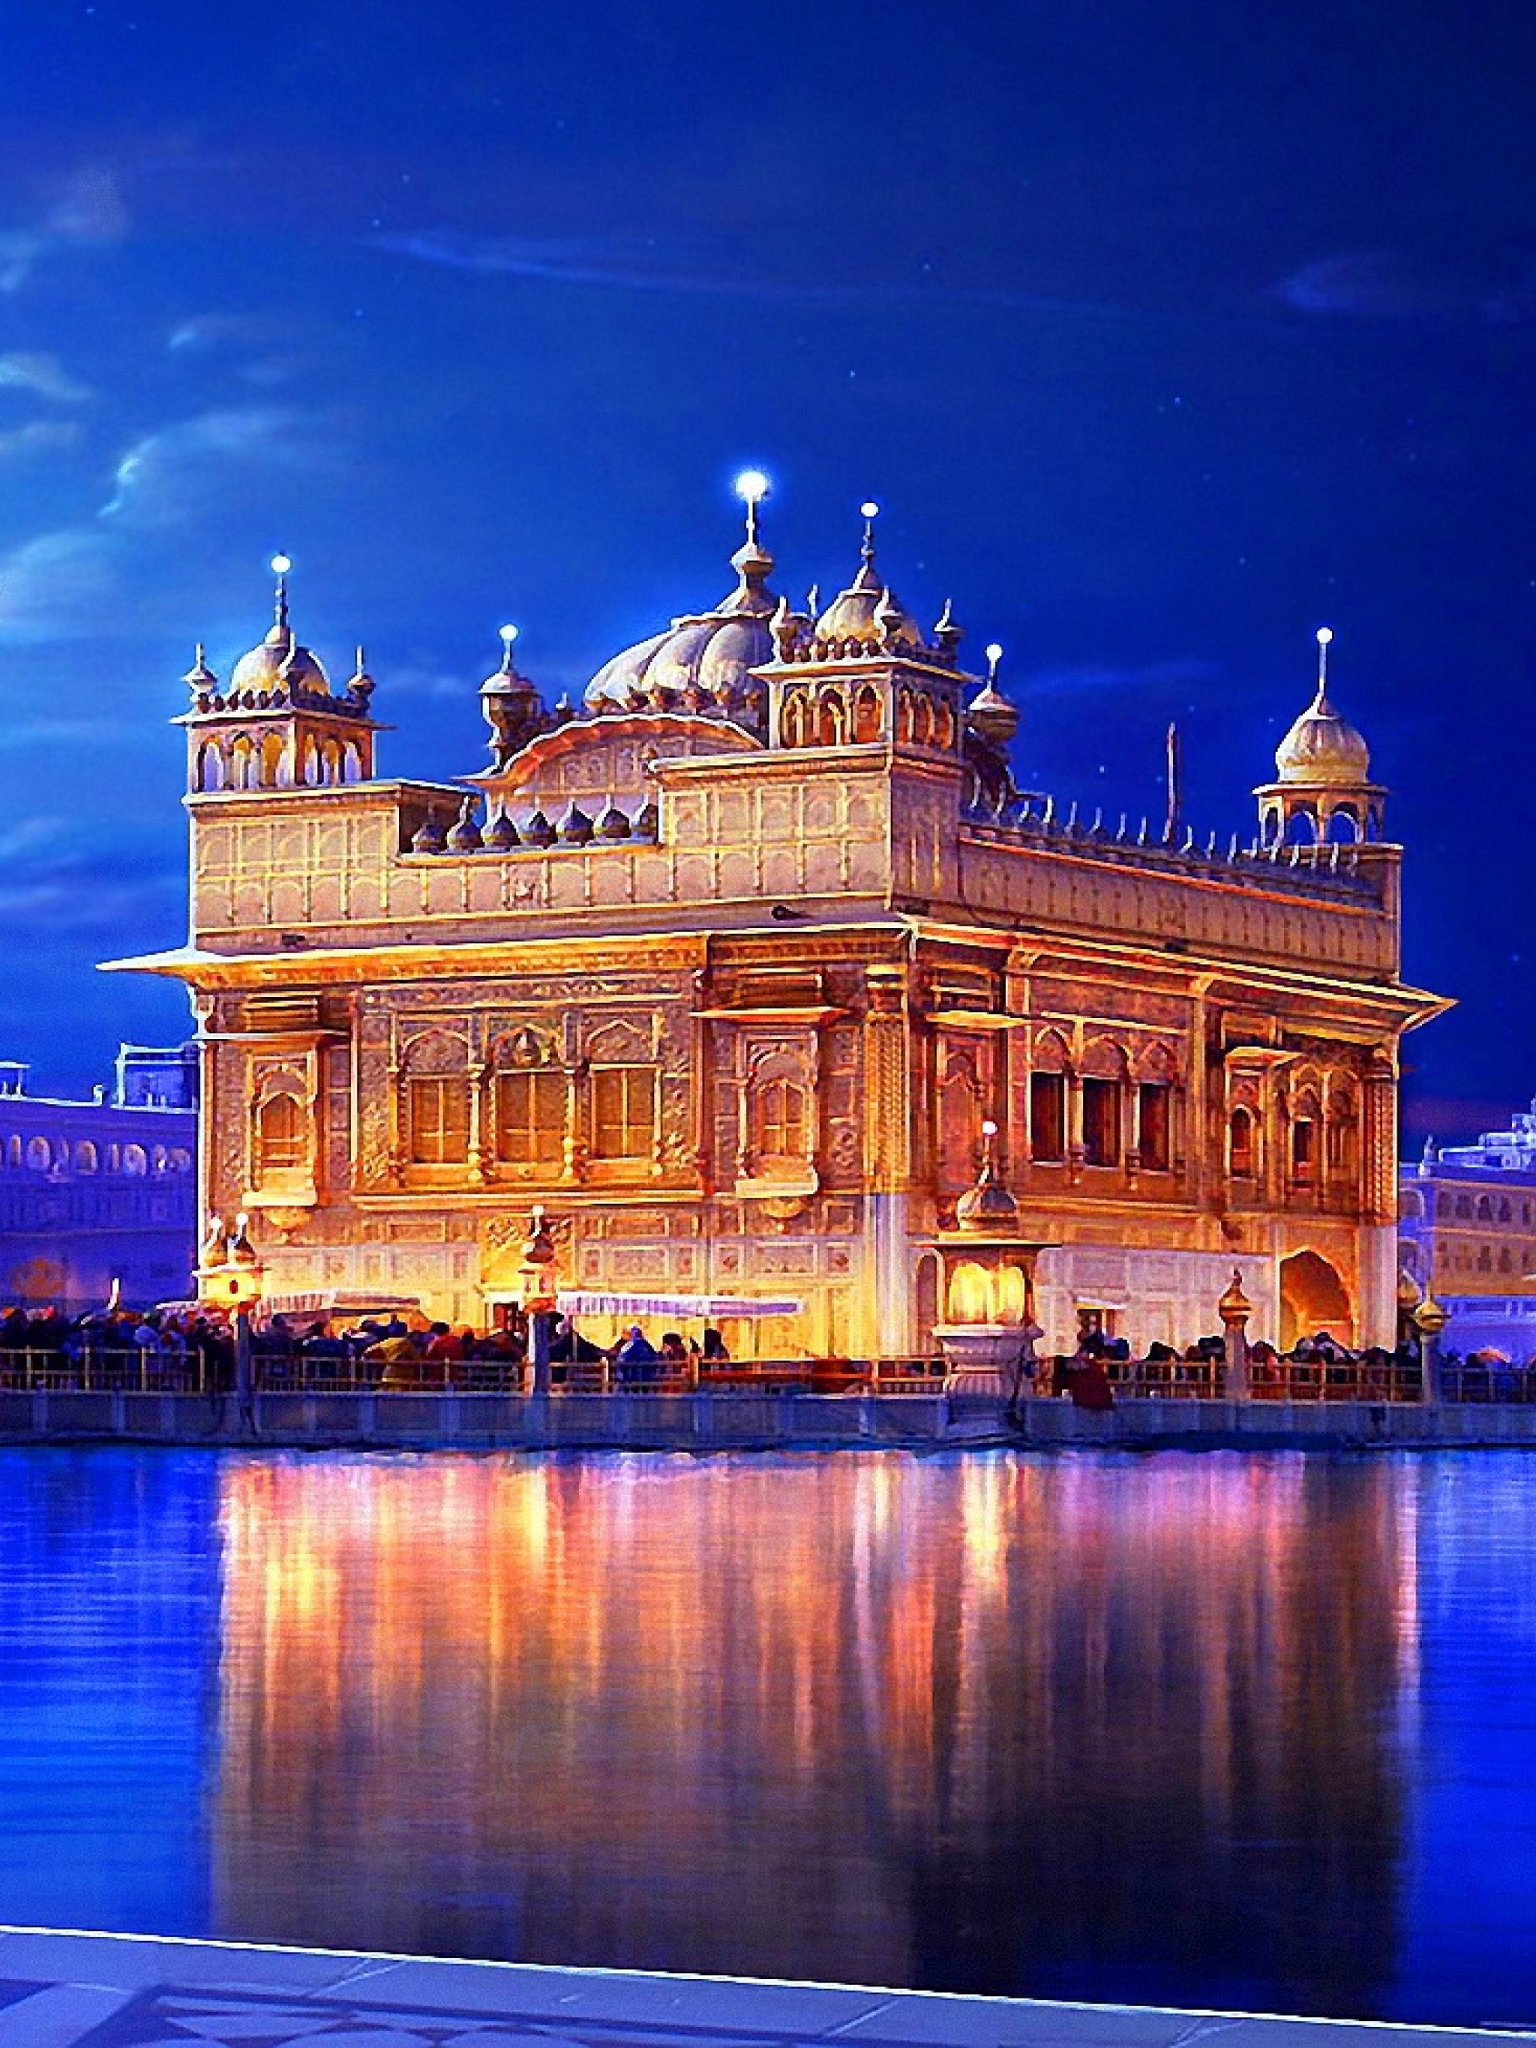 Golden Temple Amritsar India for Apple iPad Air 2 resolution